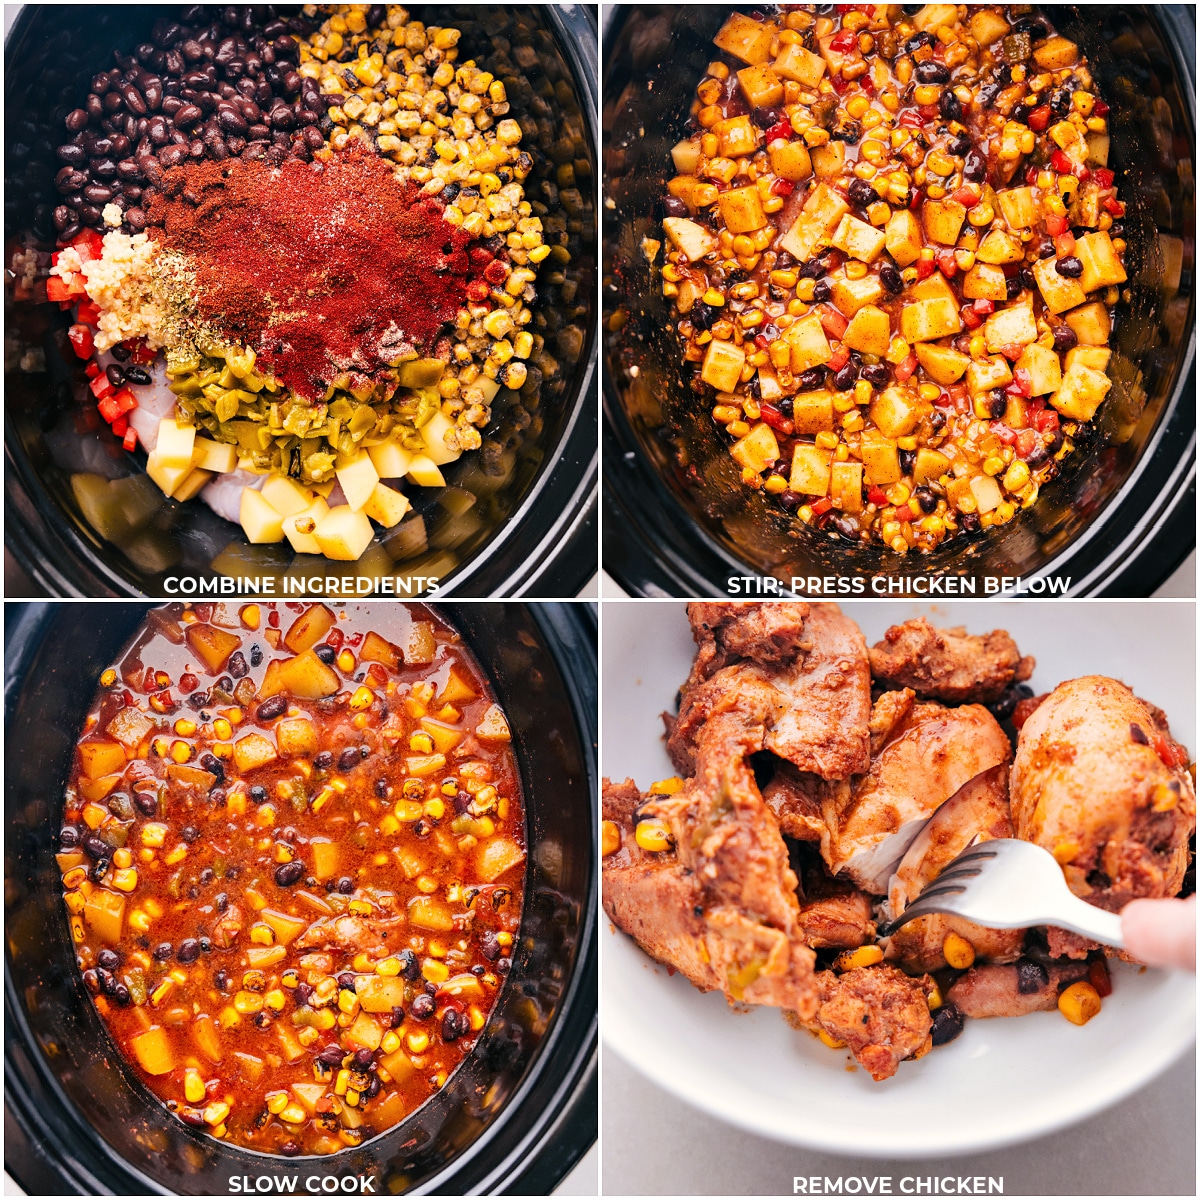 All ingredients, including peppers, potatoes, chicken, and spices, are combined and stirred in a slow cooker, with the chicken pressed below for slow cooking. The chicken is later removed for shredding.